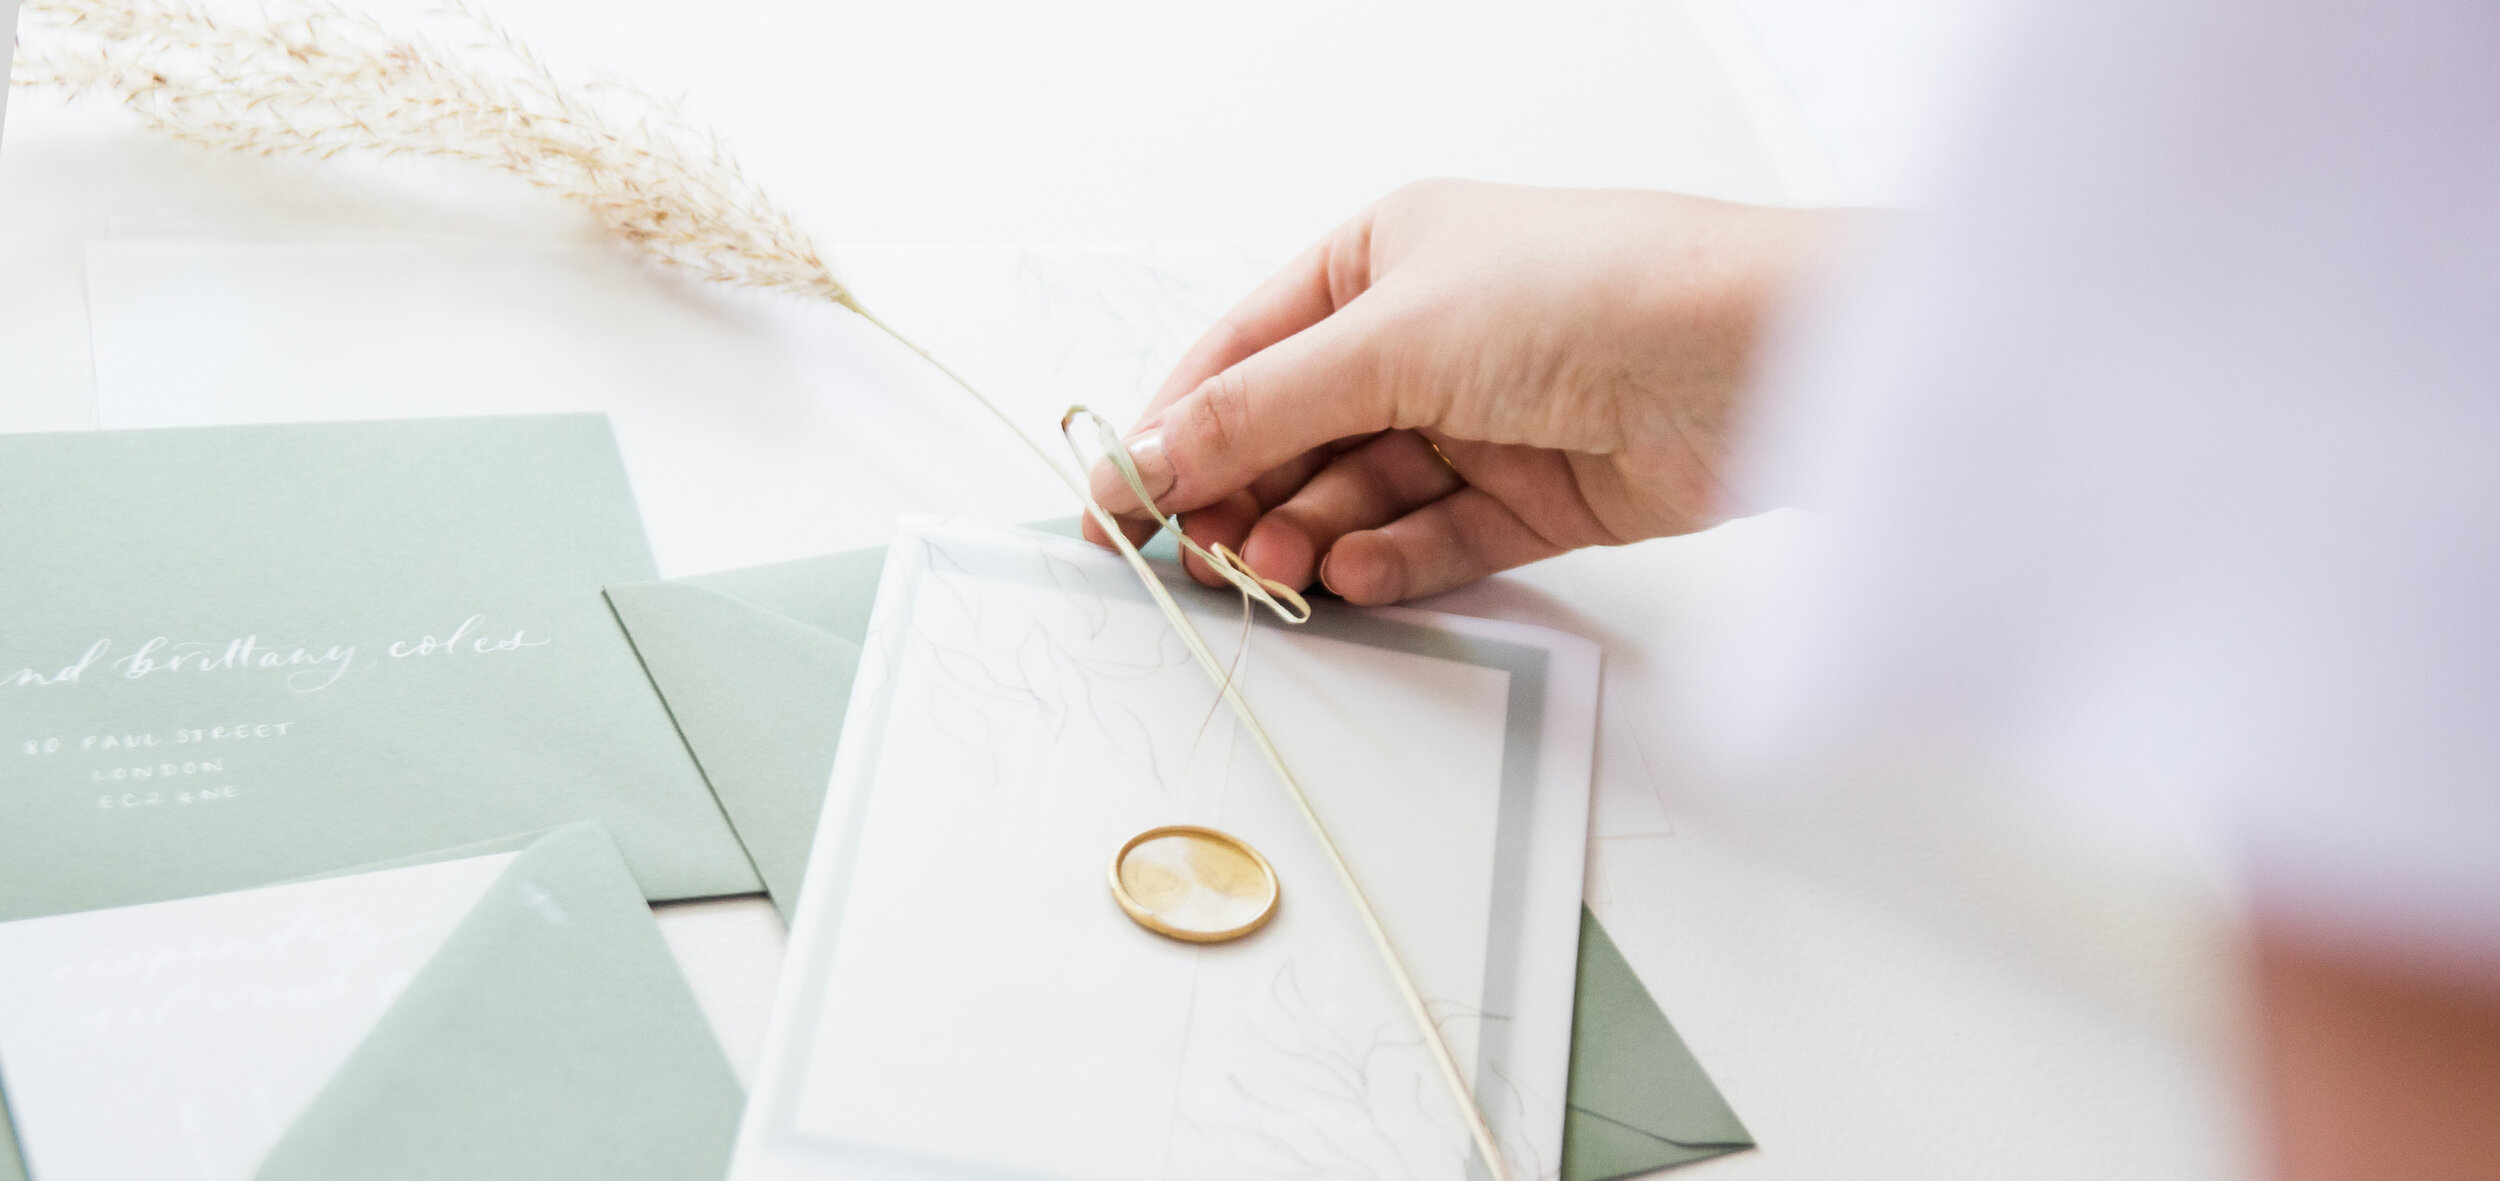 Decorative Ways to Secure Vellum To Invitations Without Glue